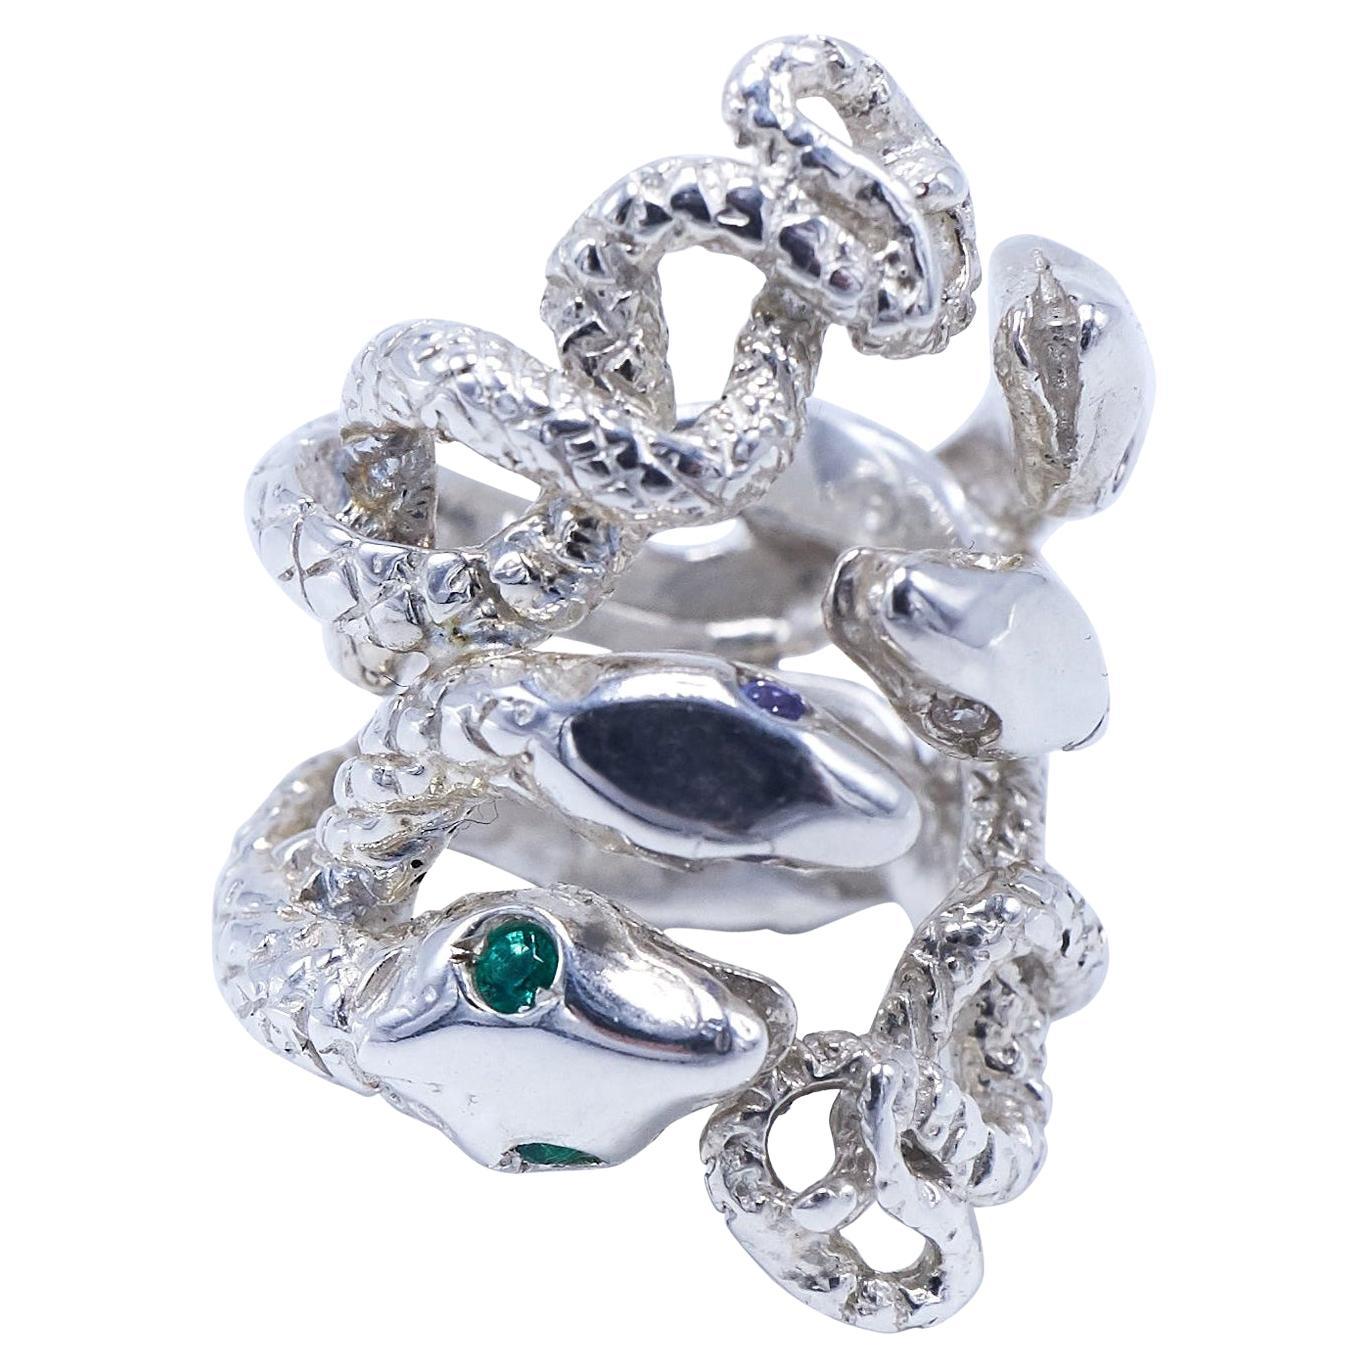 Diamond Emerald Pink Sapphire Snake Ring Sterling Silver Cocktail Ring J Dauphin For Sale